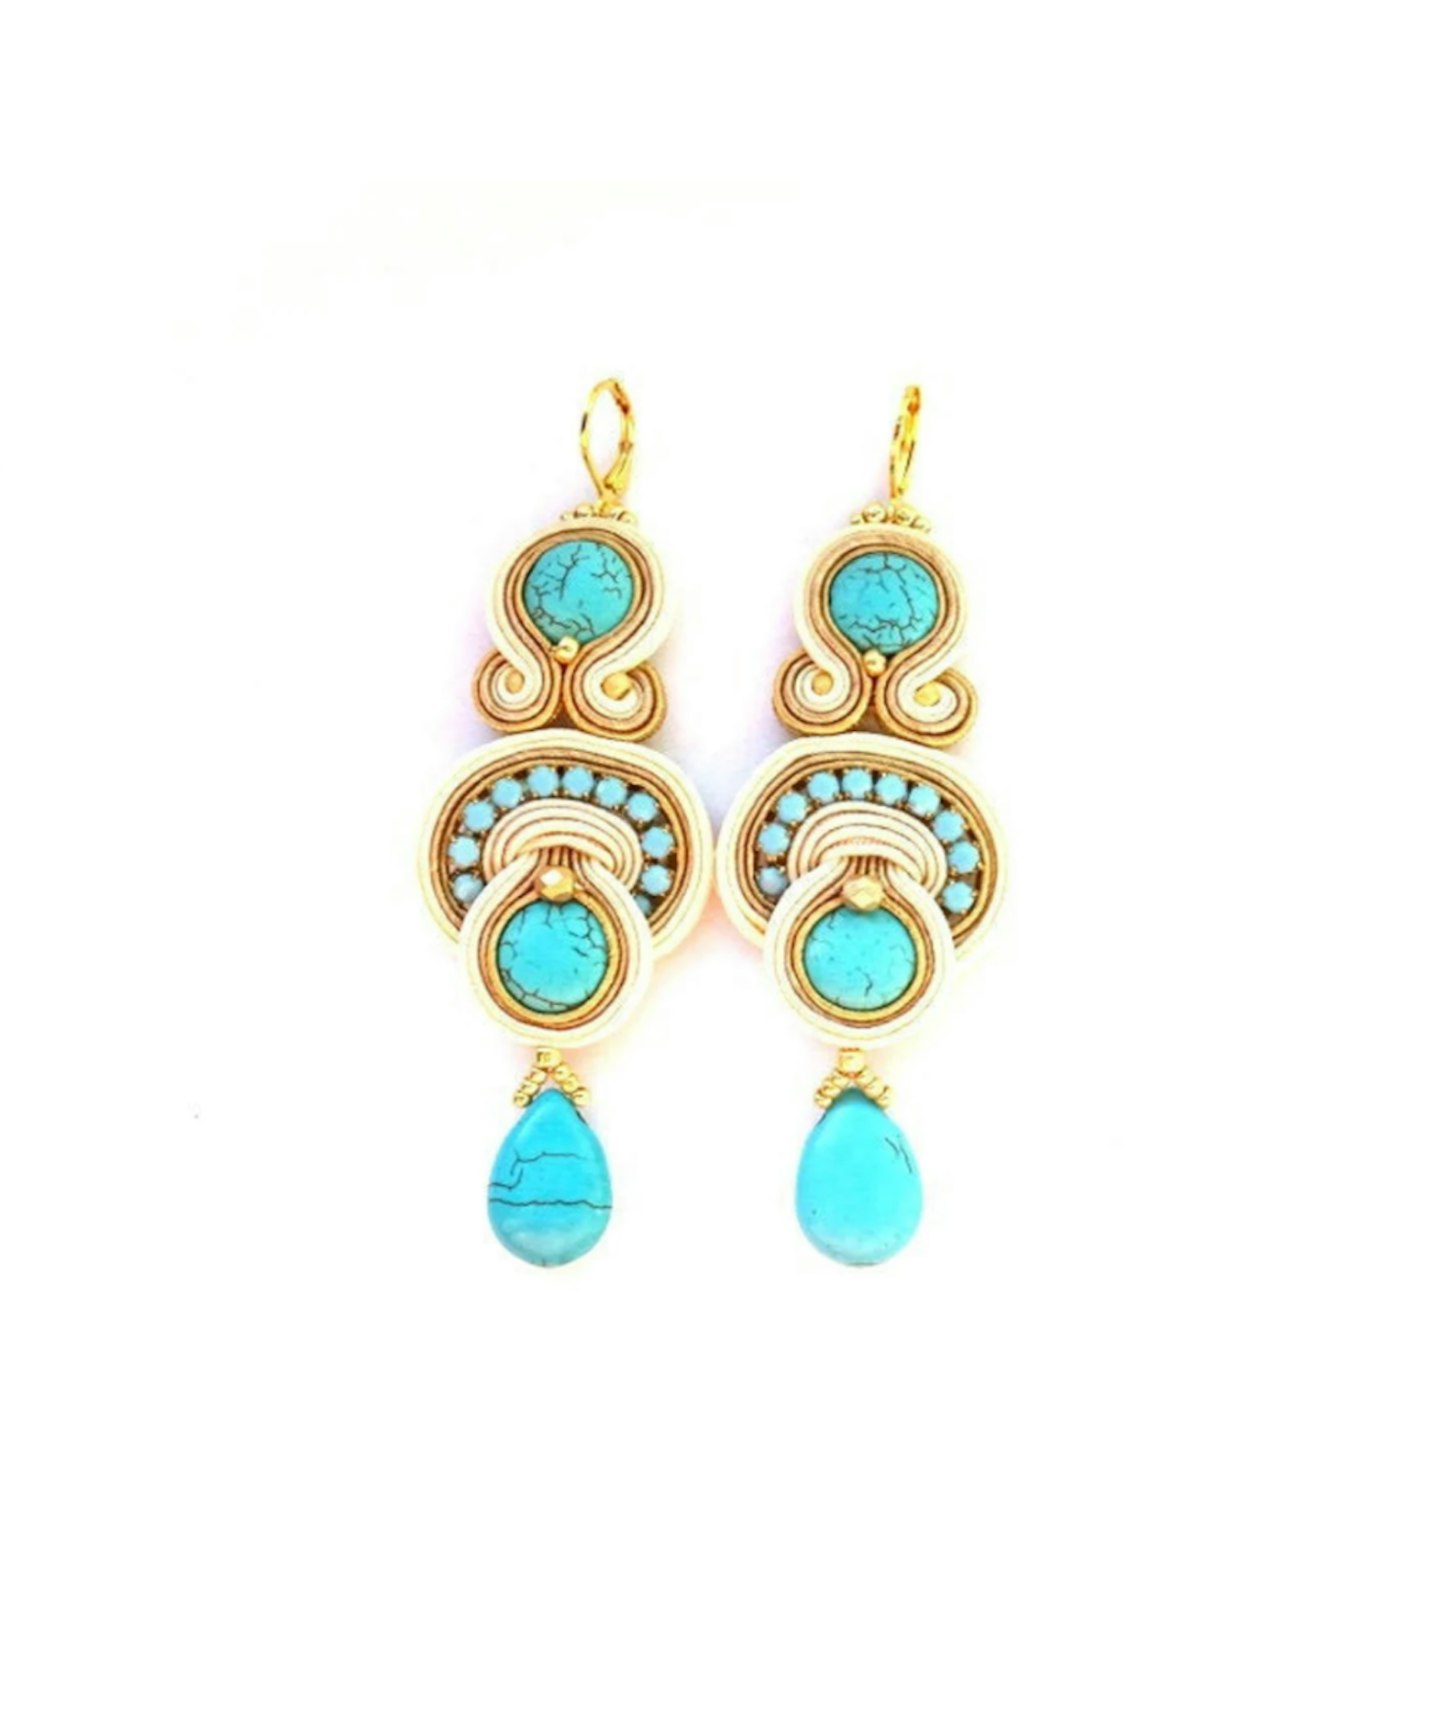 Turquoise gold drop earrings